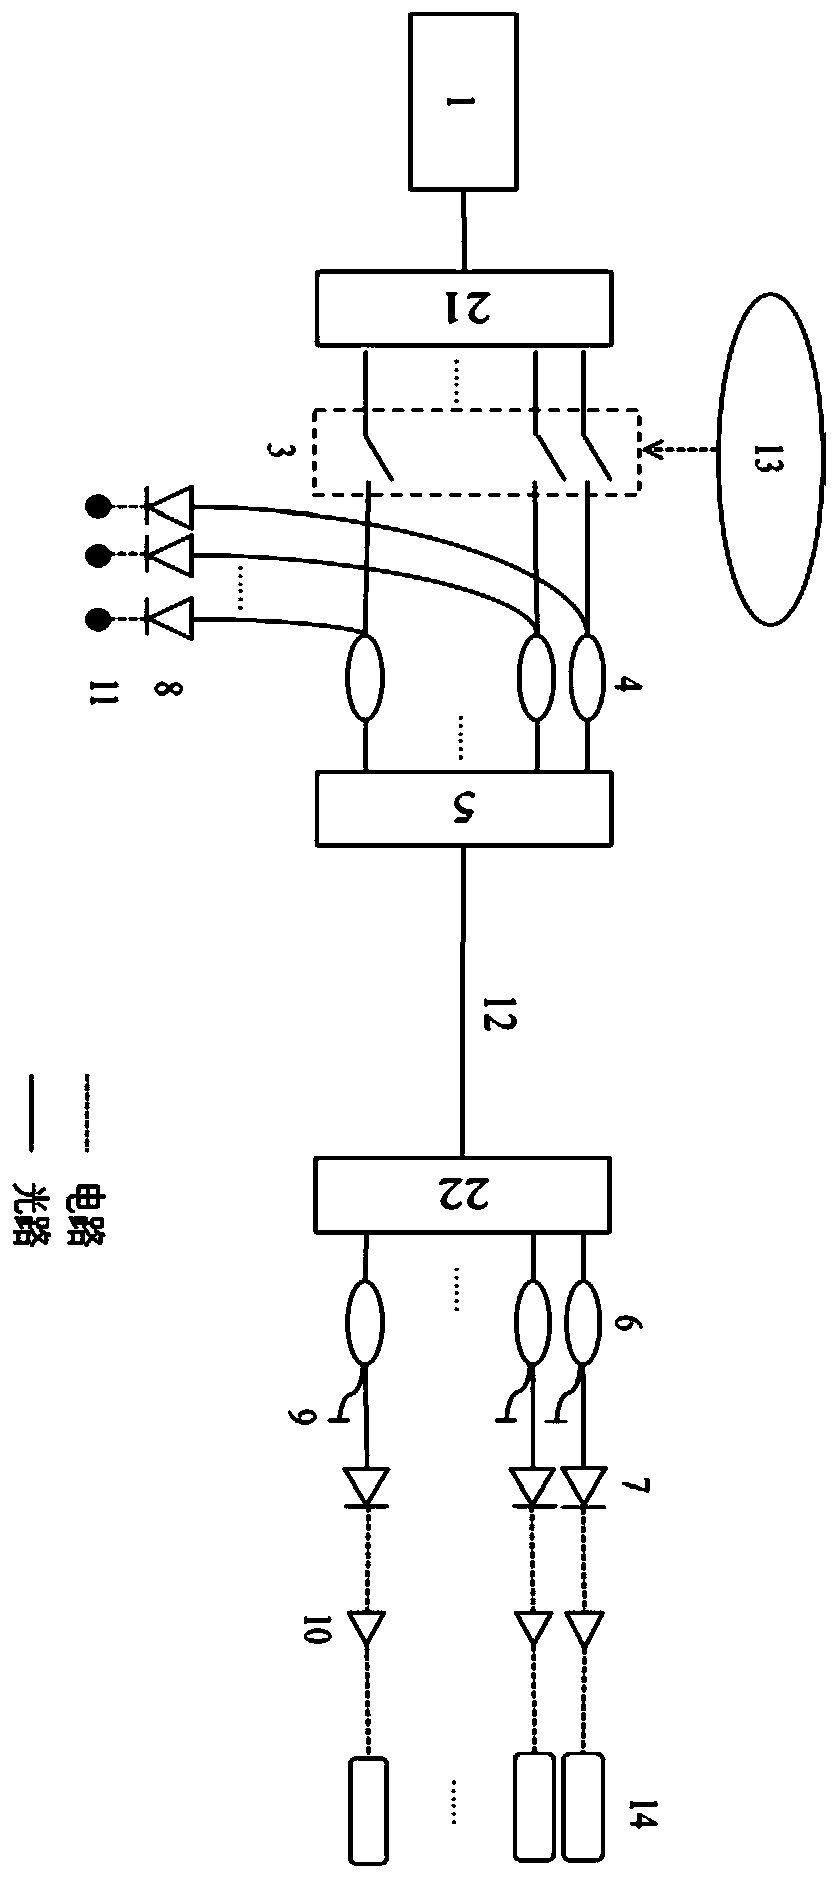 Switching value signal transmission control system based on an optical fiber